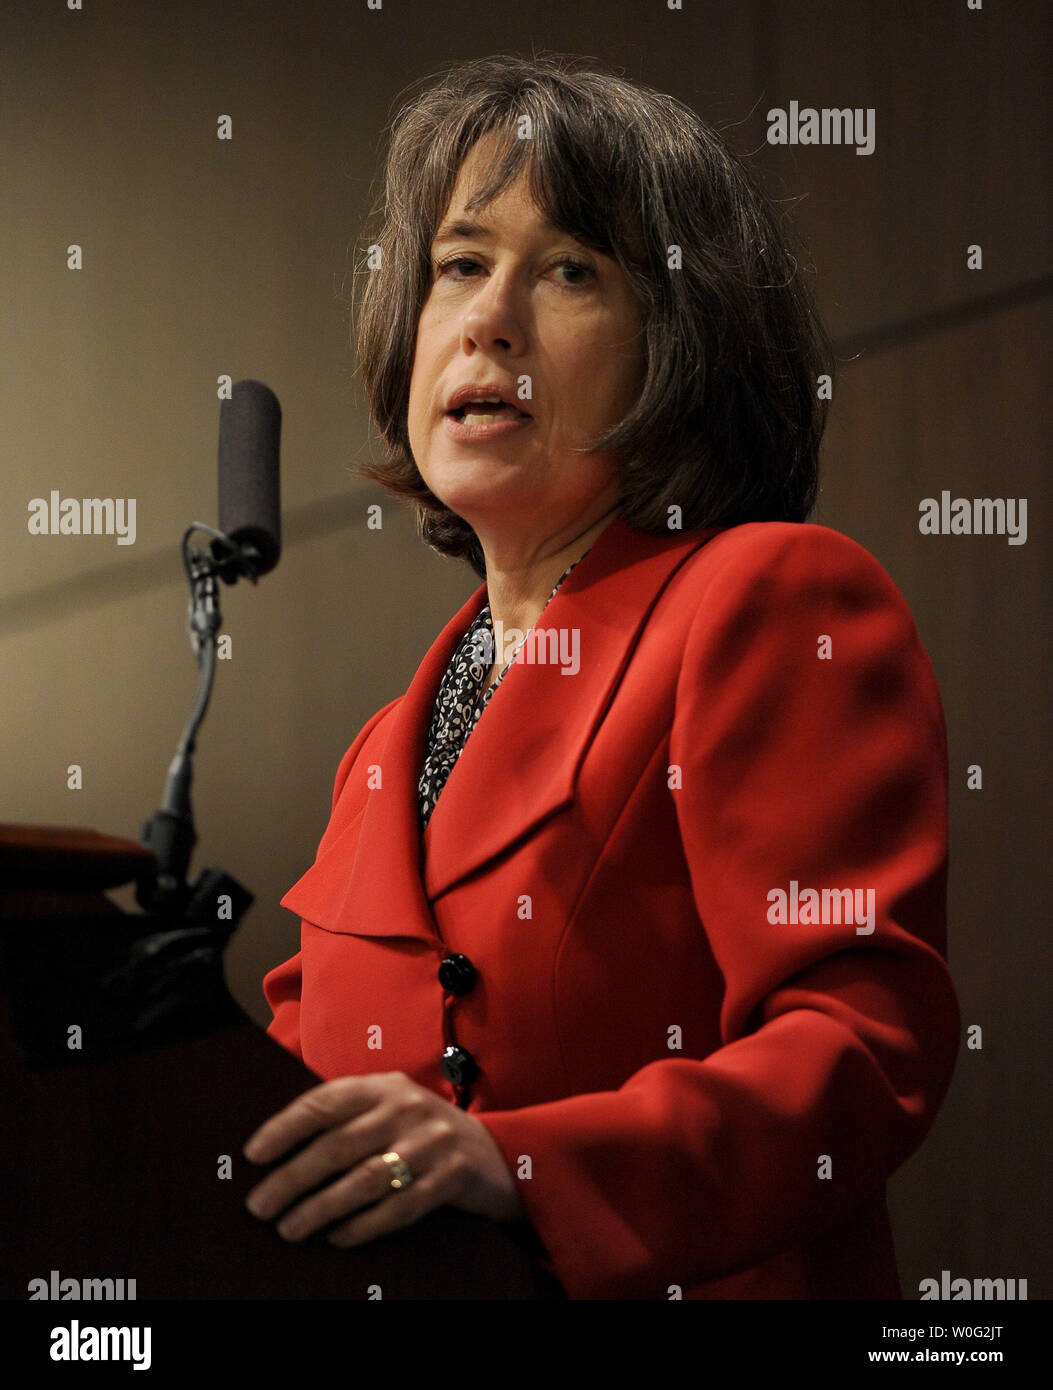 FDIC Chair Sheila Bair speaks during a Federal Deposit Insurance Corporation (FDIC) Symposium on "Mortgages and the Future of Housing Finance" in Arlington, Virginia, on October 25, 2010.     UPI/Roger L. Wollenberg Stock Photo